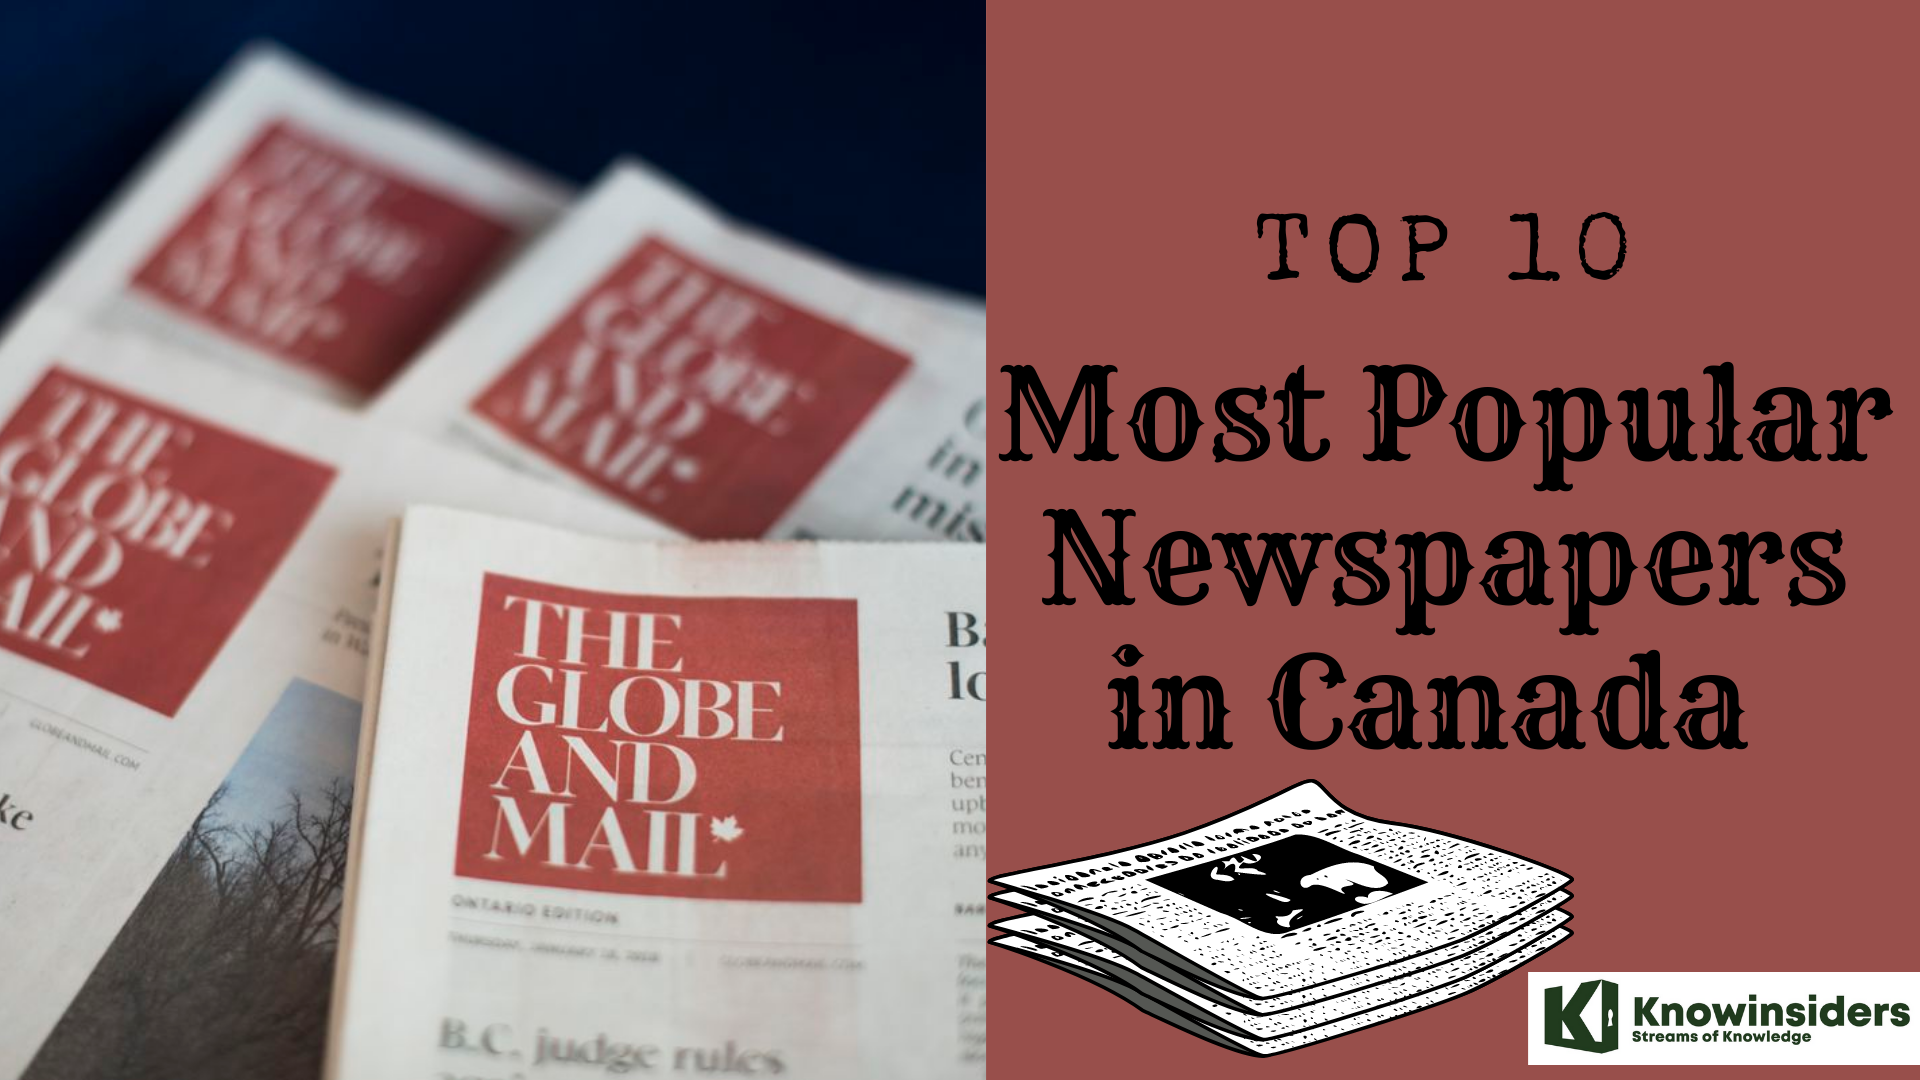 Top 10 Most Popular Newspapers in Canada